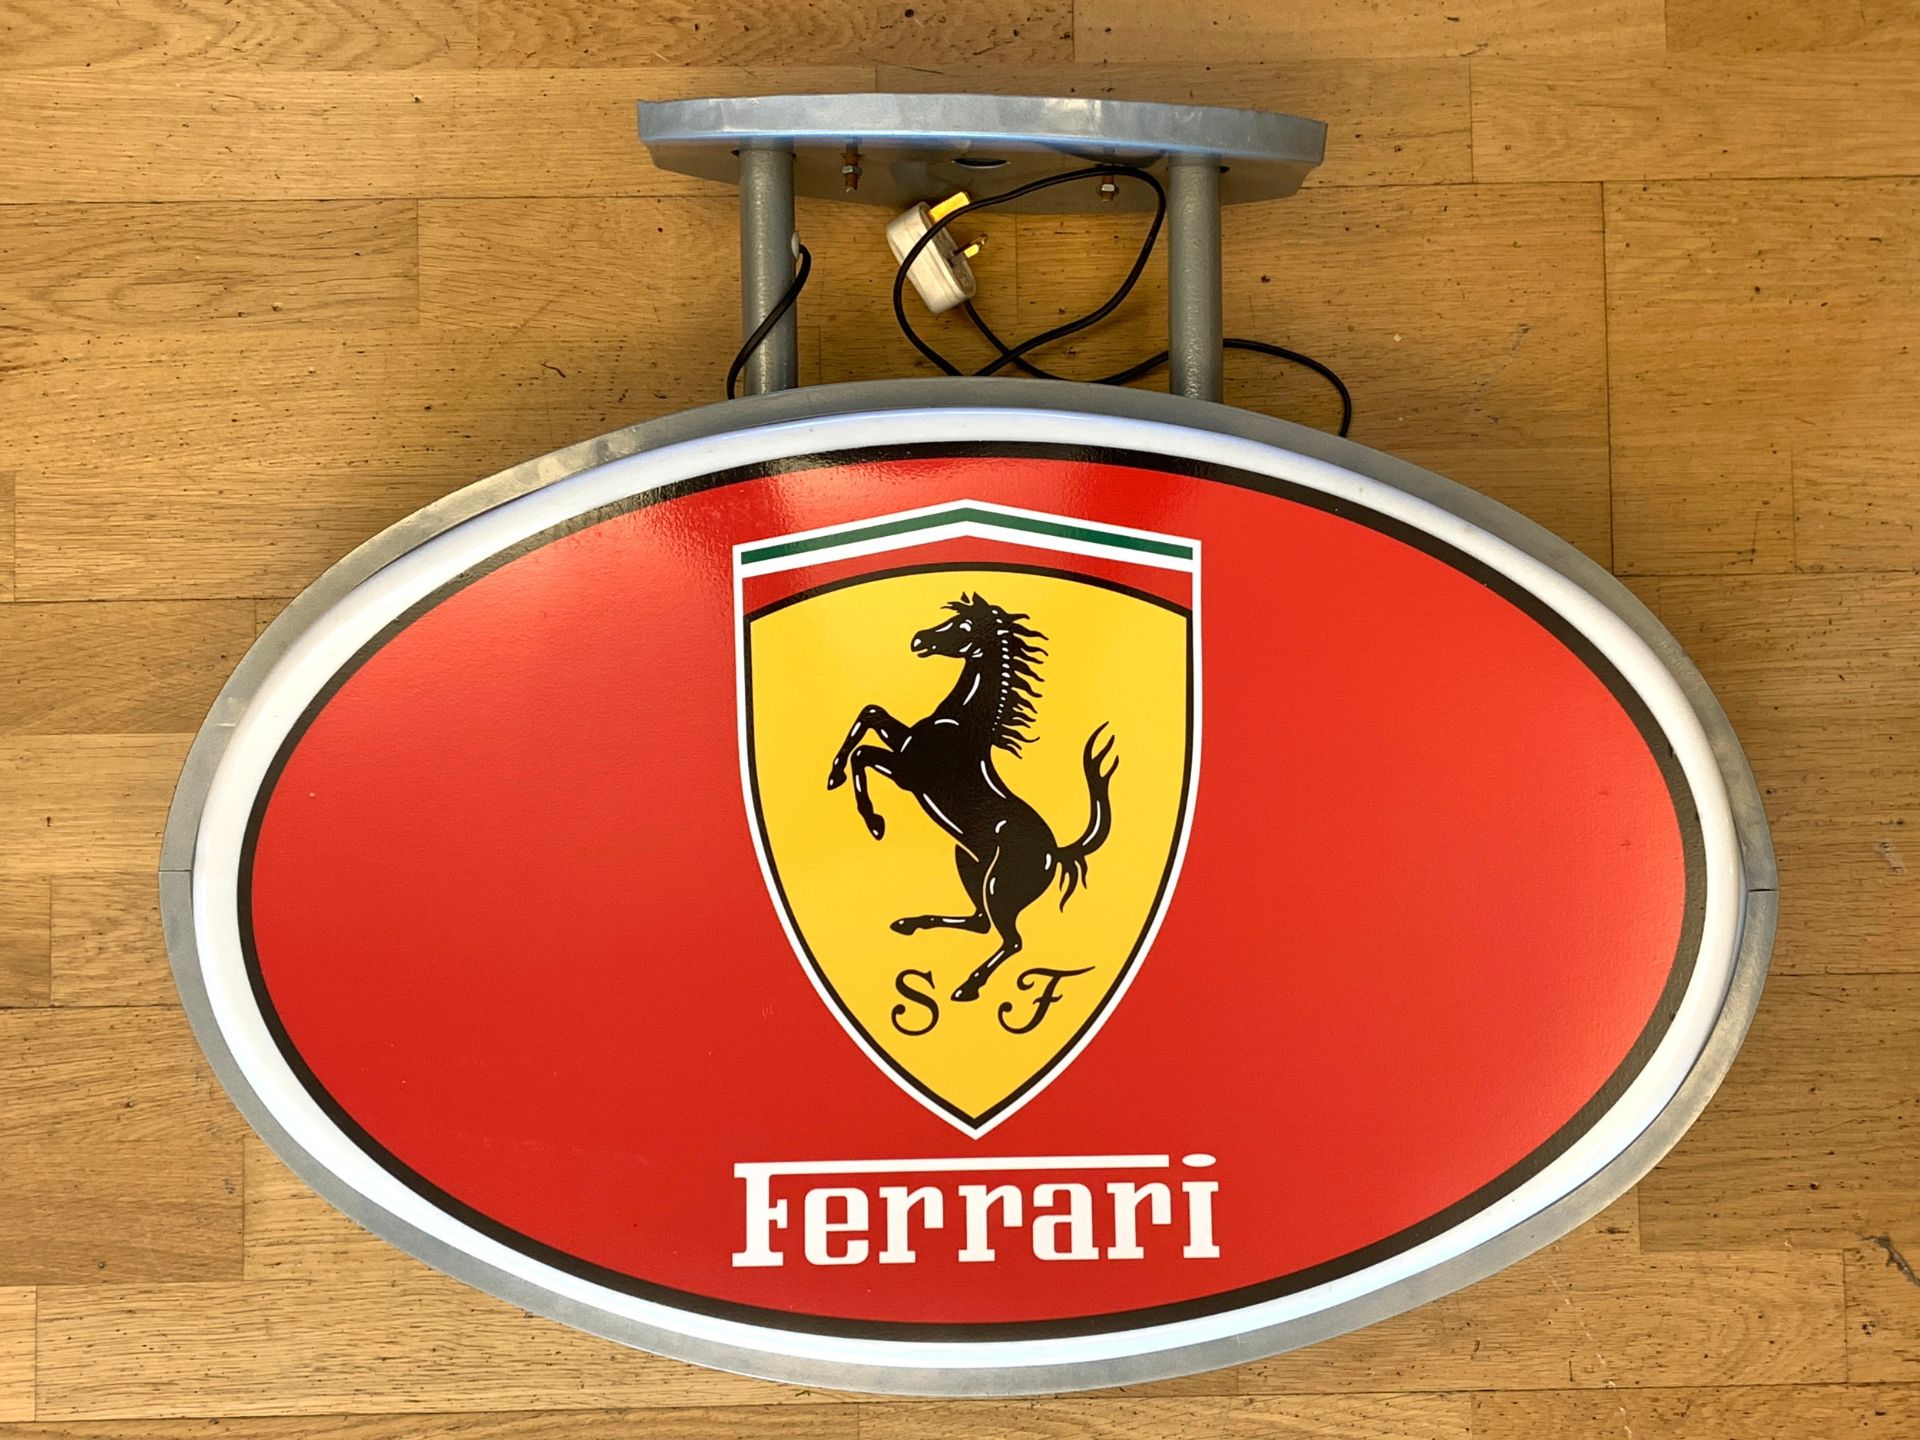 A Ferrari illuminated shop display sign, roof hanging, metal frame with plastic shell, depicting the - Image 2 of 4